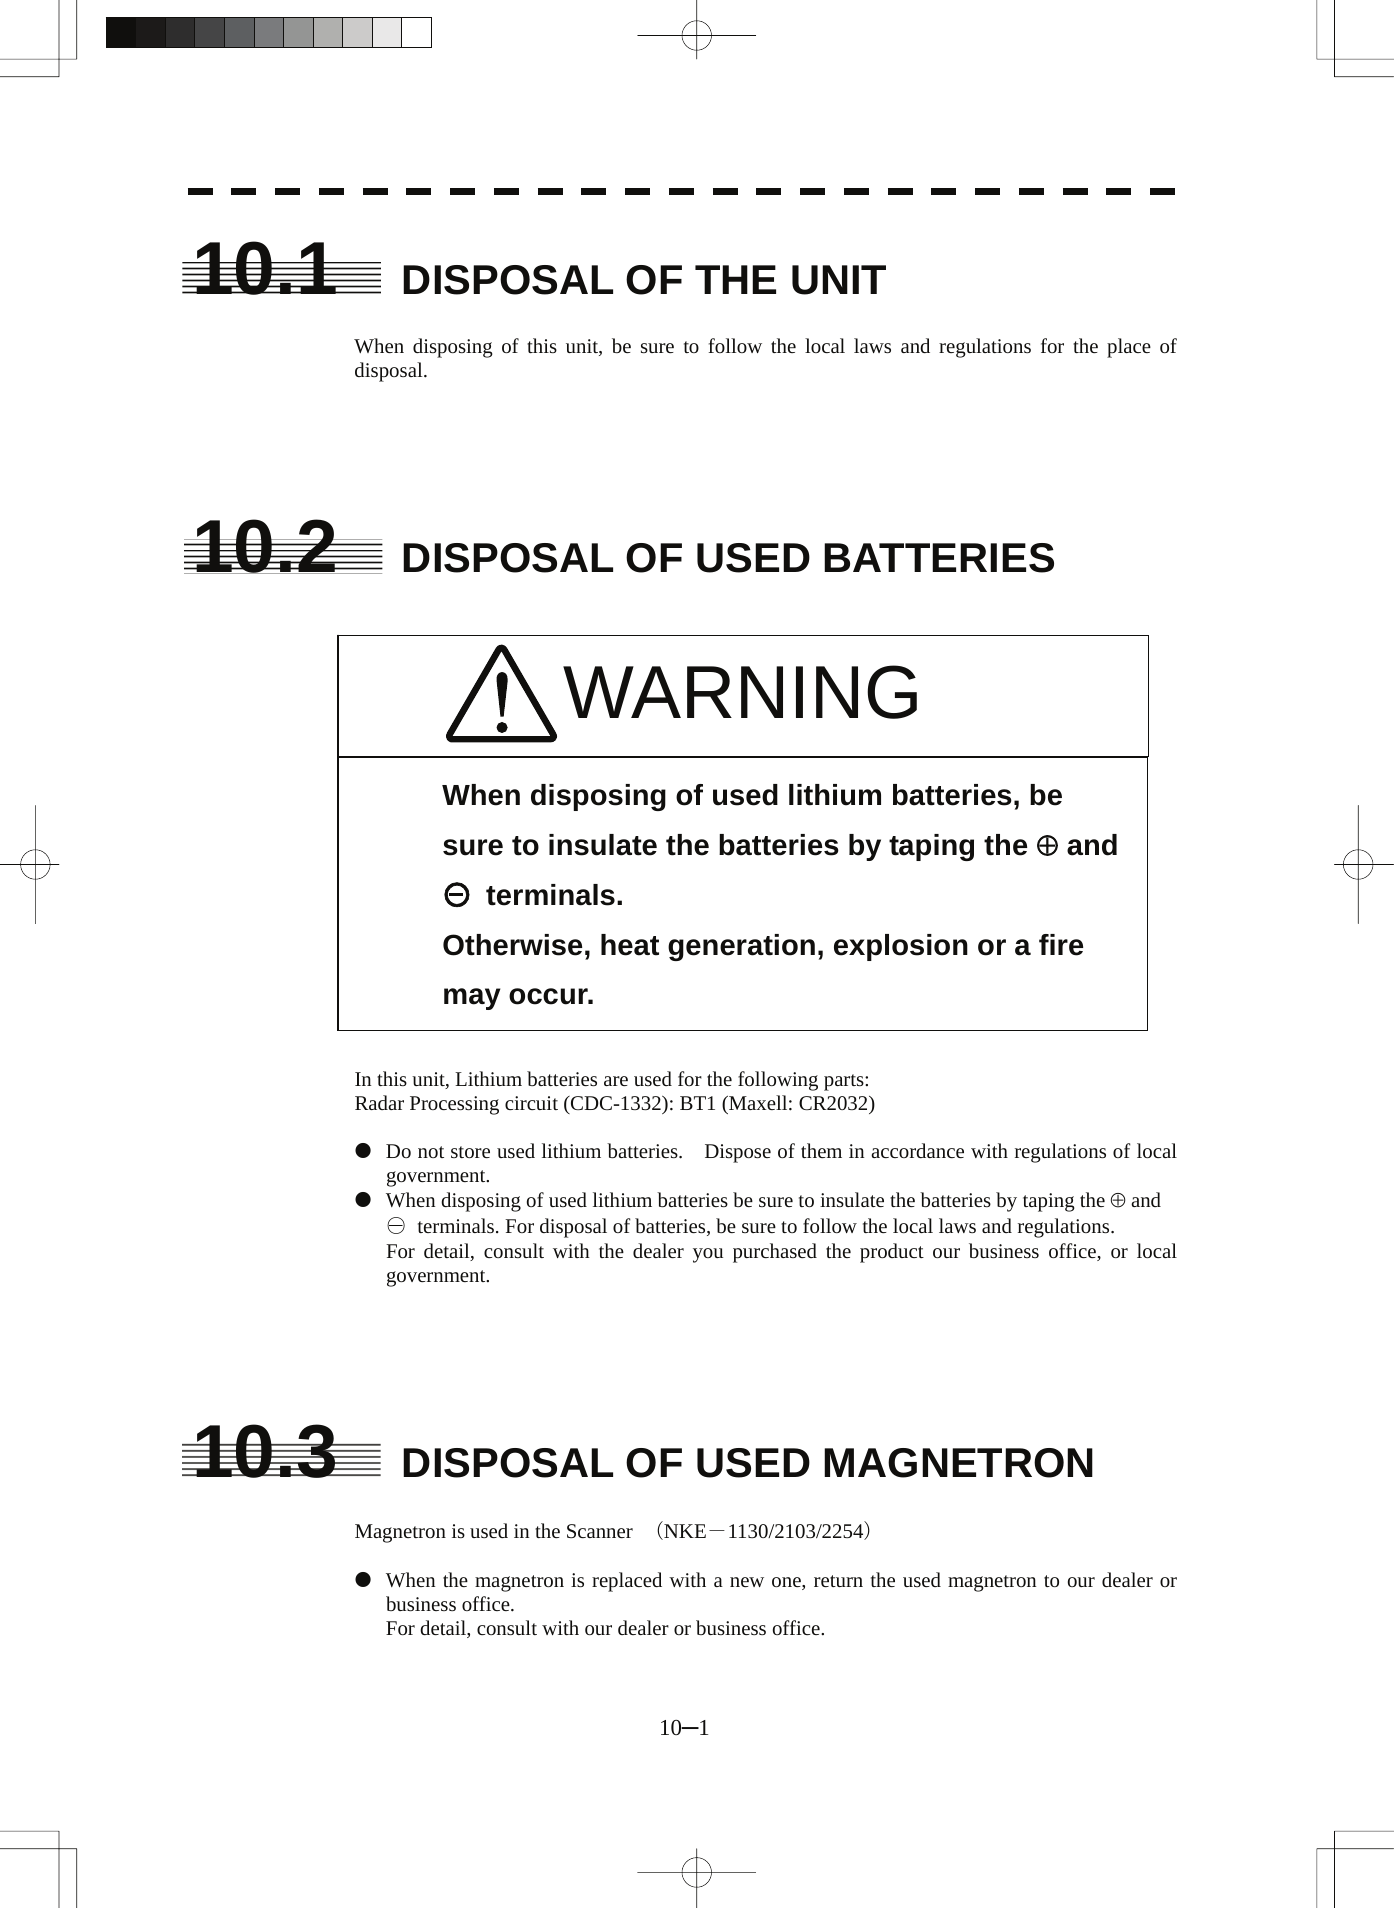  10.1  DISPOSAL OF THE UNIT  When disposing of this unit, be sure to follow the local laws and regulations for the place of disposal.      10.2  DISPOSAL OF USED BATTERIES    WARNING                 When disposing of used lithium batteries, be sure to insulate the batteries by taping the ⊕ and ○ terminals. Otherwise, heat generation, explosion or a fire may occur.  In this unit, Lithium batteries are used for the following parts: Radar Processing circuit (CDC-1332): BT1 (Maxell: CR2032)  z  Do not store used lithium batteries.    Dispose of them in accordance with regulations of local government. z  When disposing of used lithium batteries be sure to insulate the batteries by taping the ⊕ and   ○  terminals. For disposal of batteries, be sure to follow the local laws and regulations.   For detail, consult with the dealer you purchased the product our business office, or local government.      10.3  DISPOSAL OF USED MAGNETRON  Magnetron is used in the Scanner  （NKE－1130/2103/2254）  z  When the magnetron is replaced with a new one, return the used magnetron to our dealer or business office.   For detail, consult with our dealer or business office.  10─1 